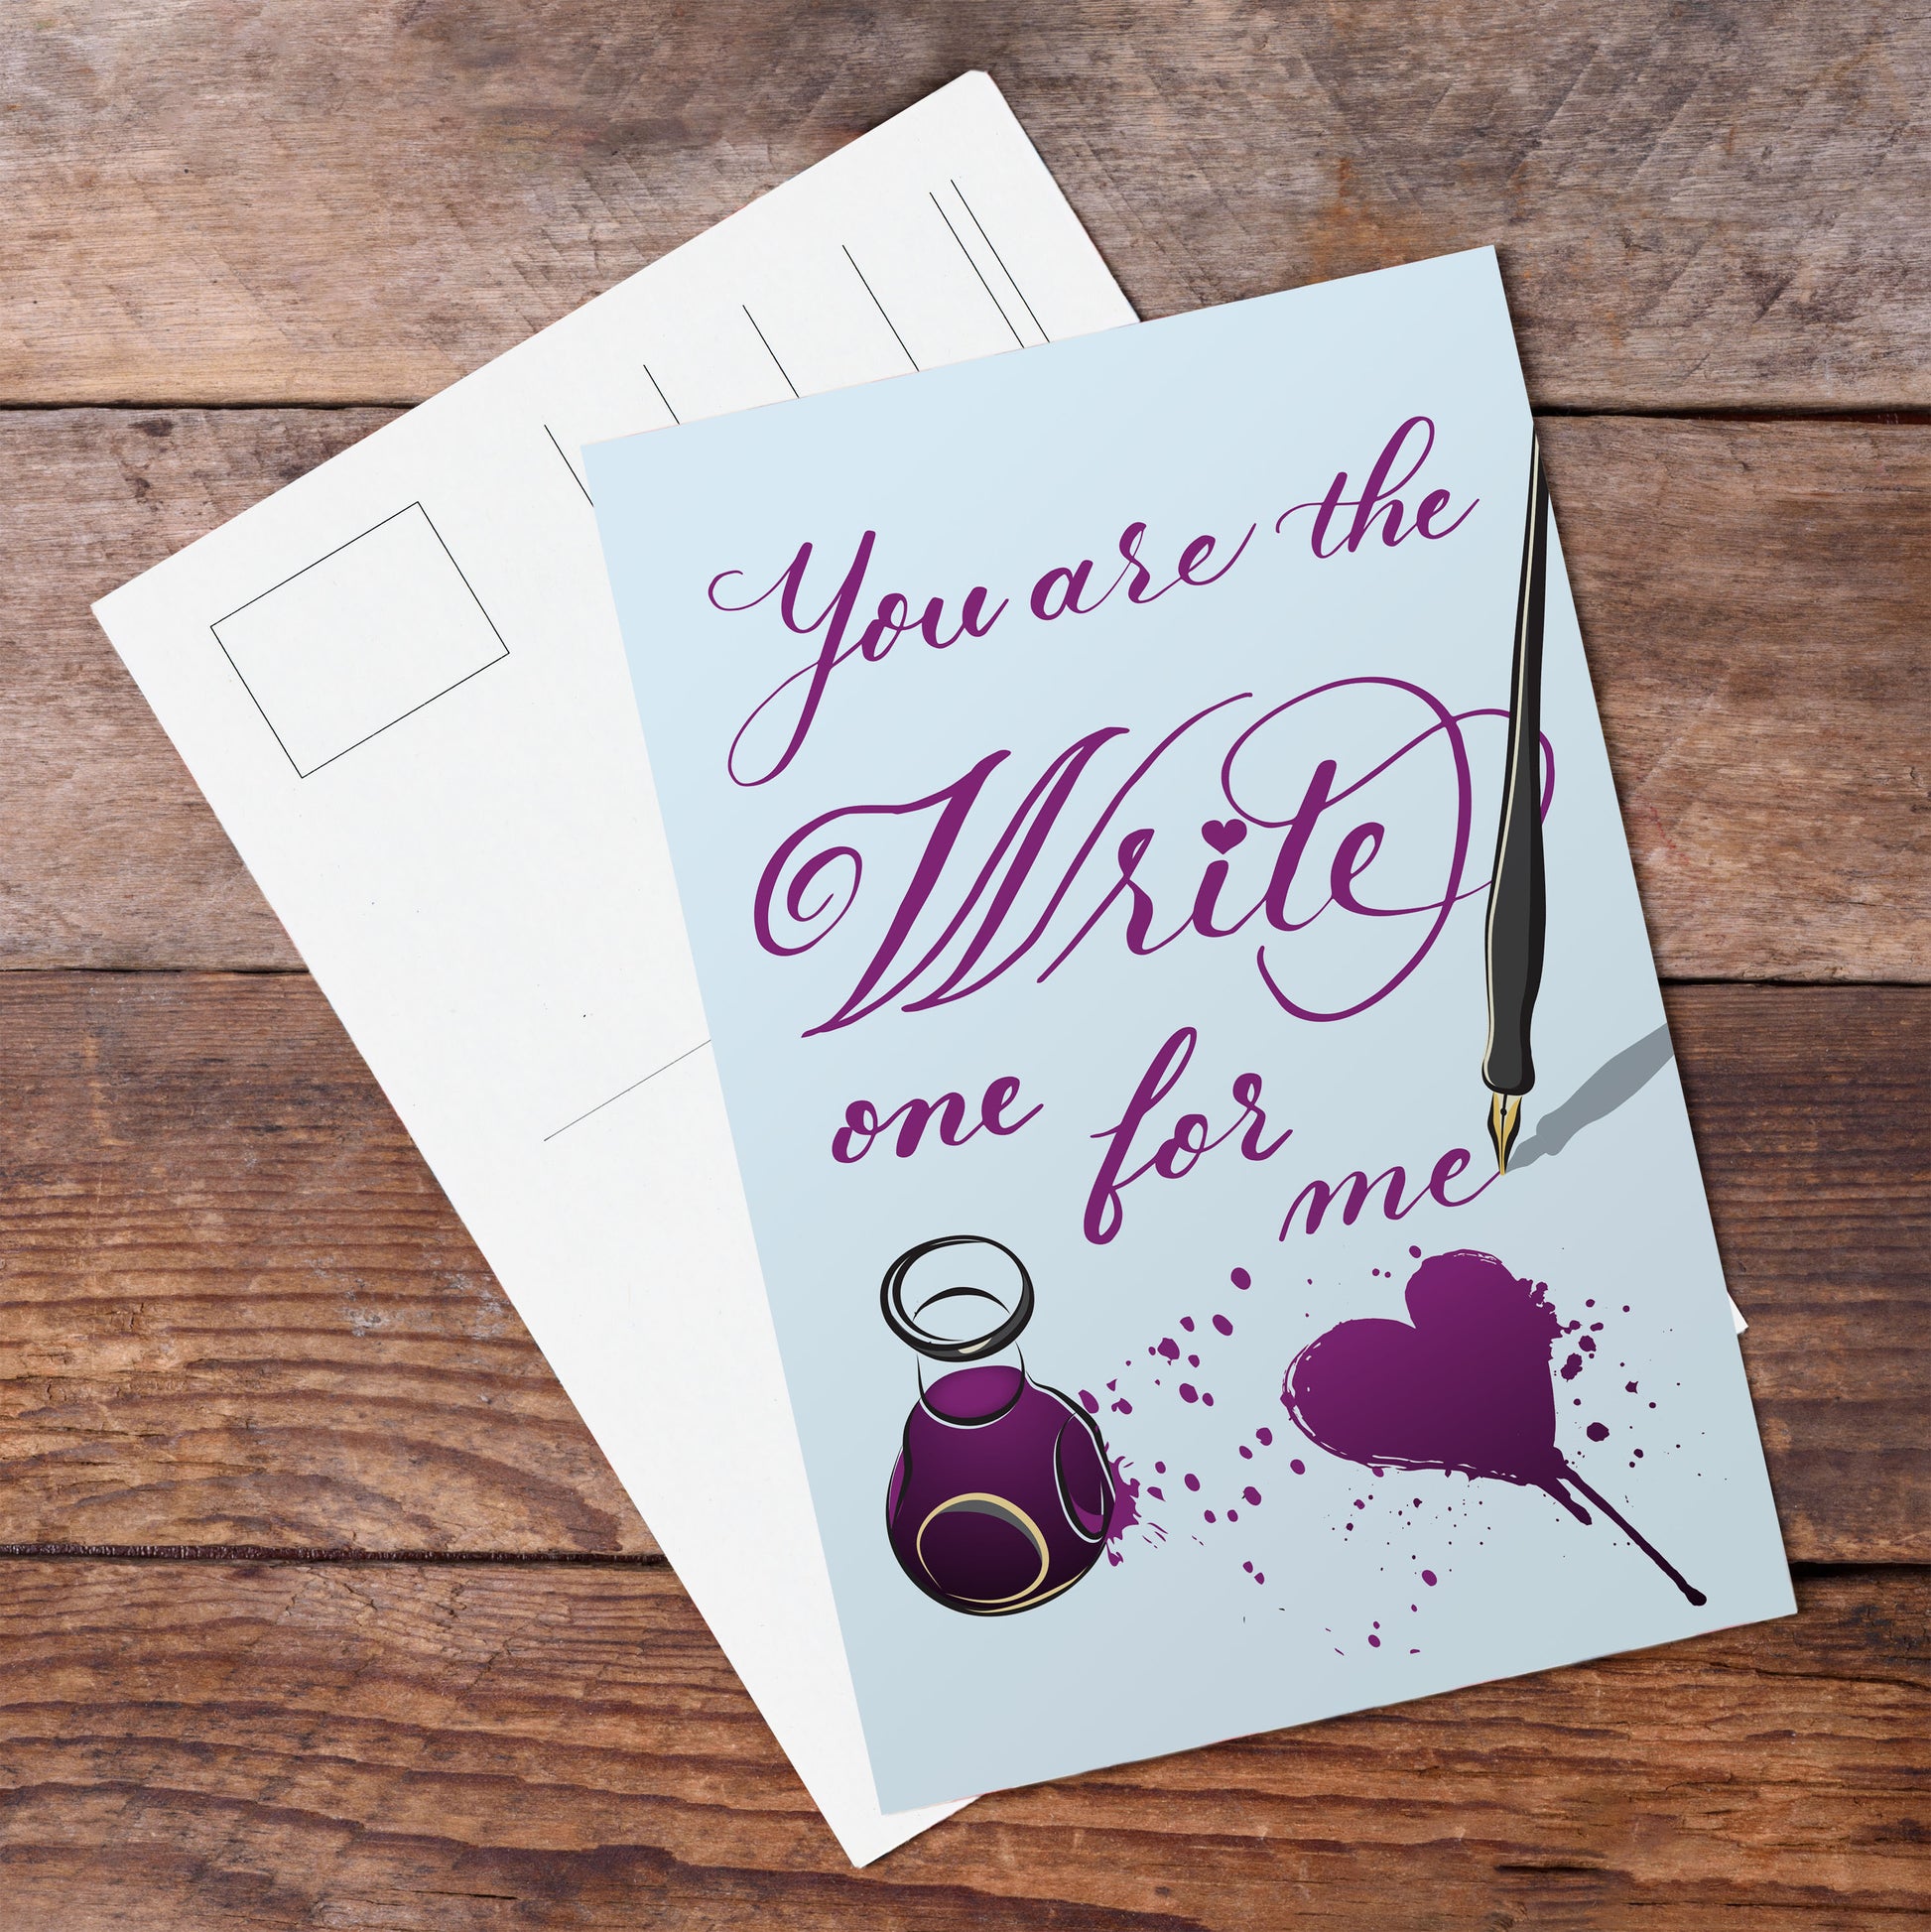 A lifestyle view of the postcard: "You are the Write one for me"